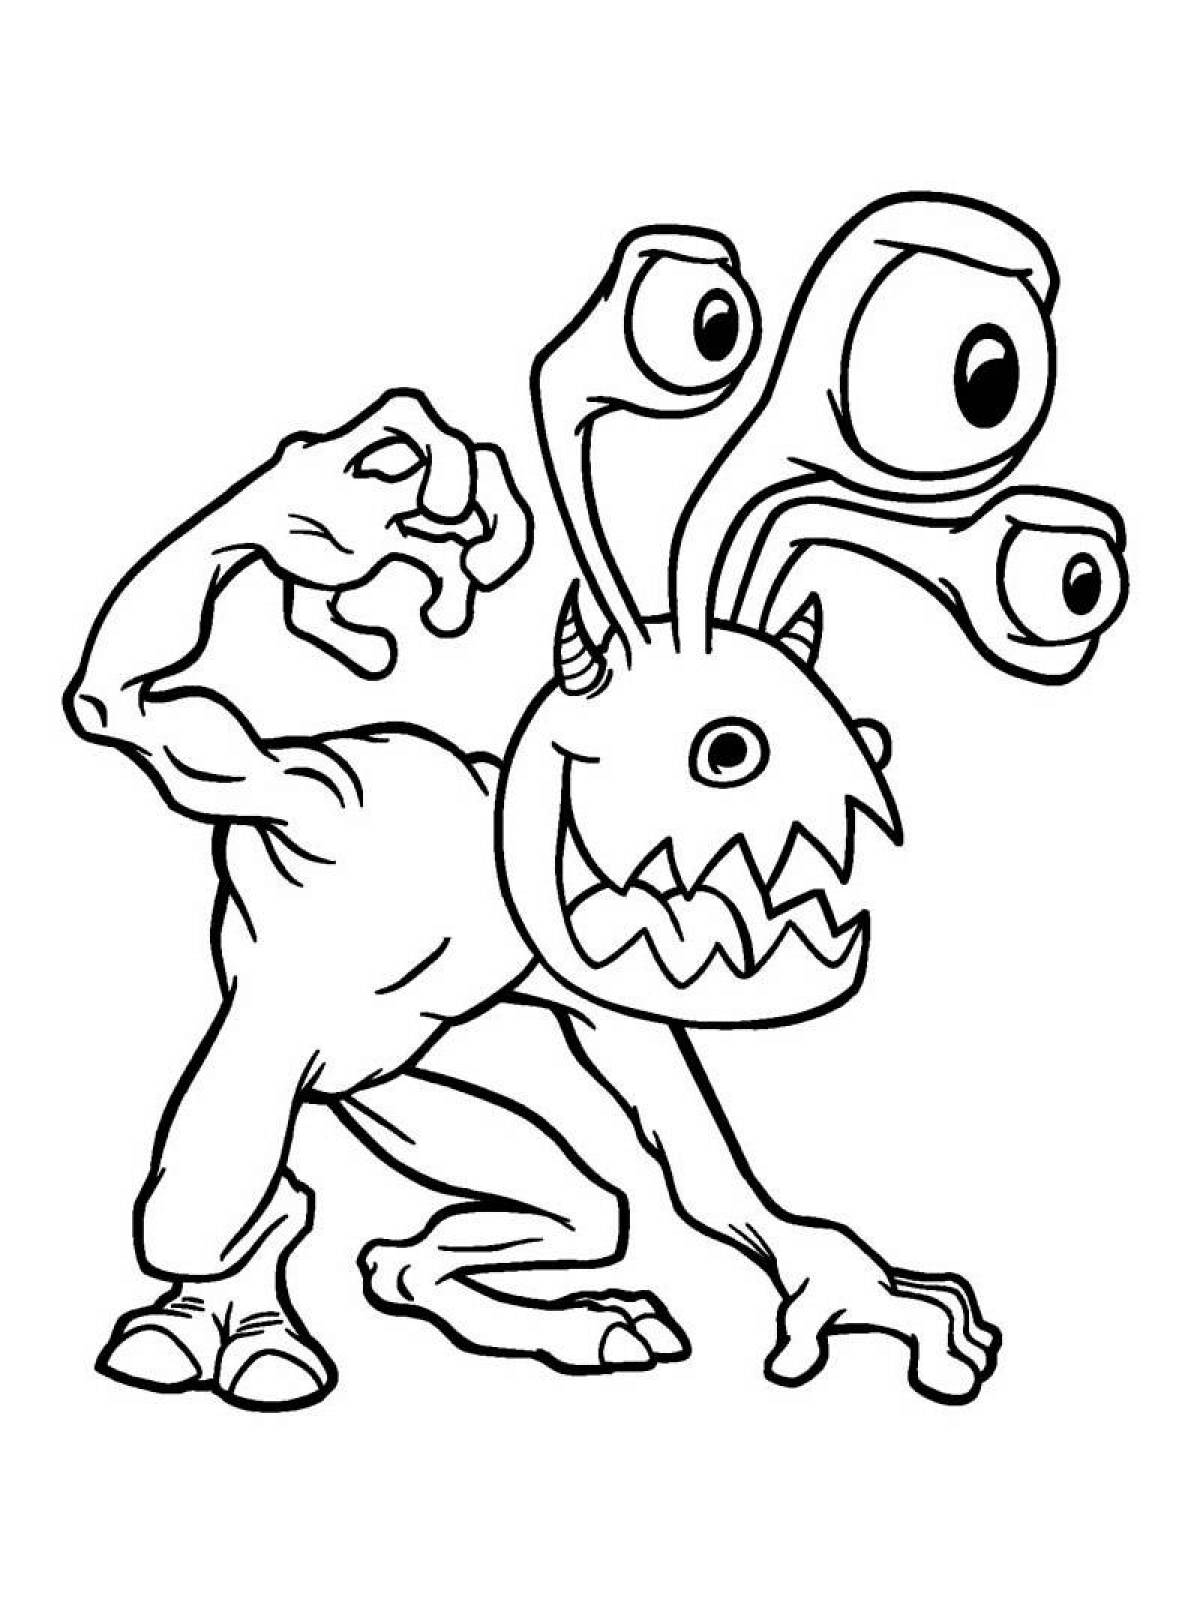 Fancy monster coloring pages